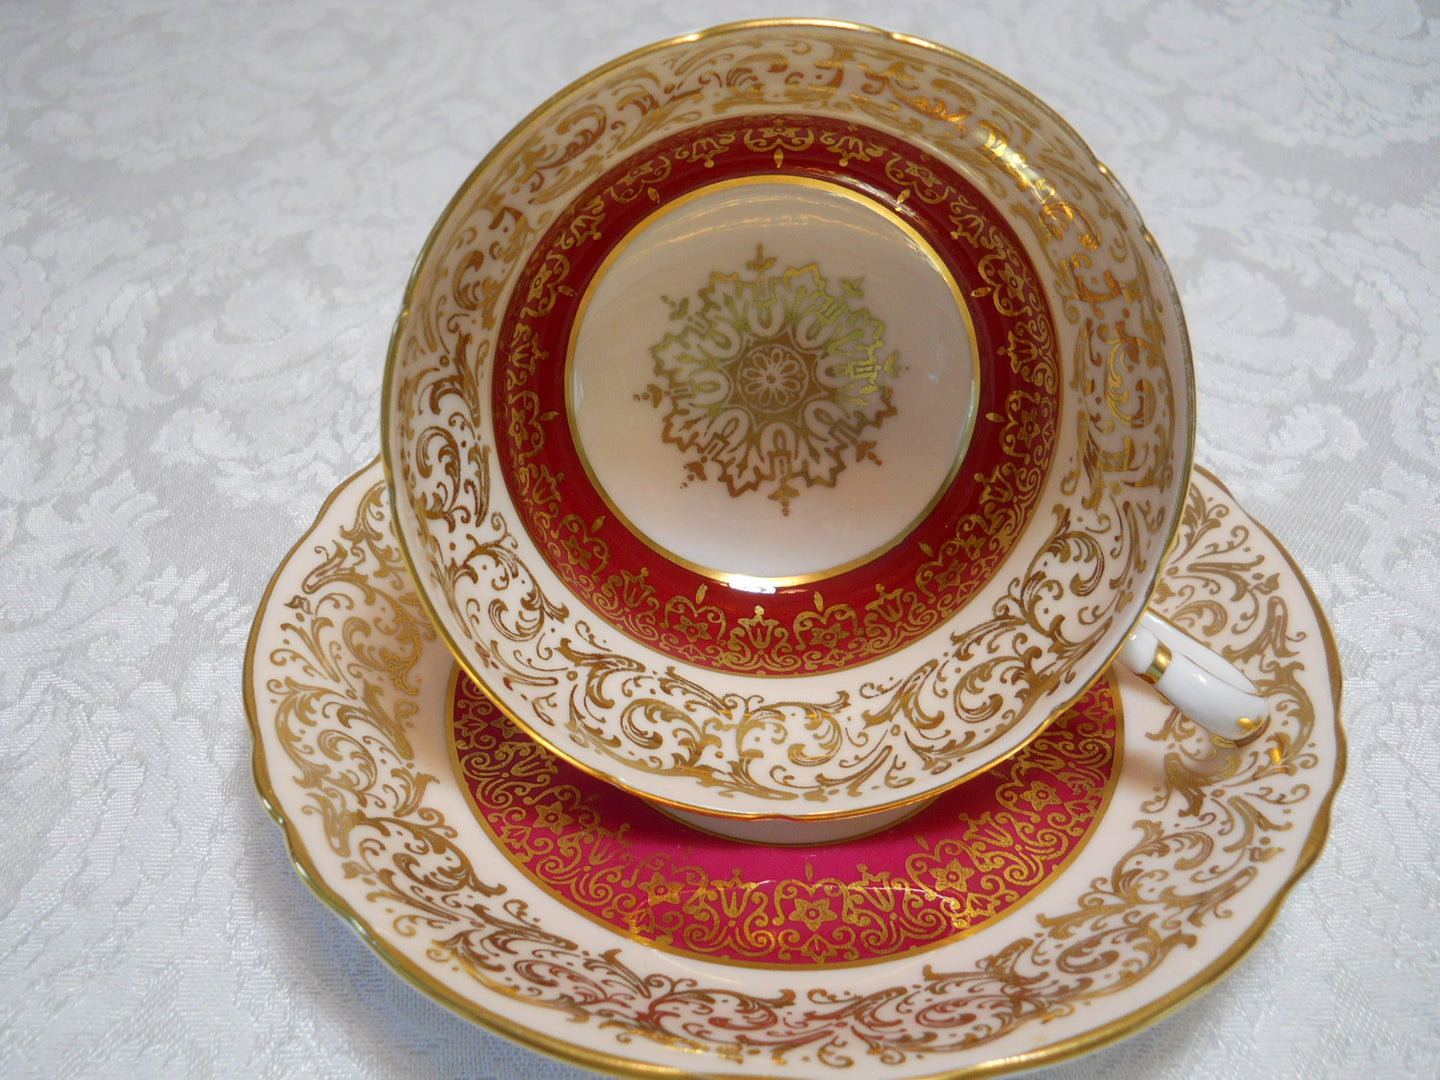 Paragon By Appointment Cranberry and Gold Filigree Tea Cup/Saucer c.1950-60